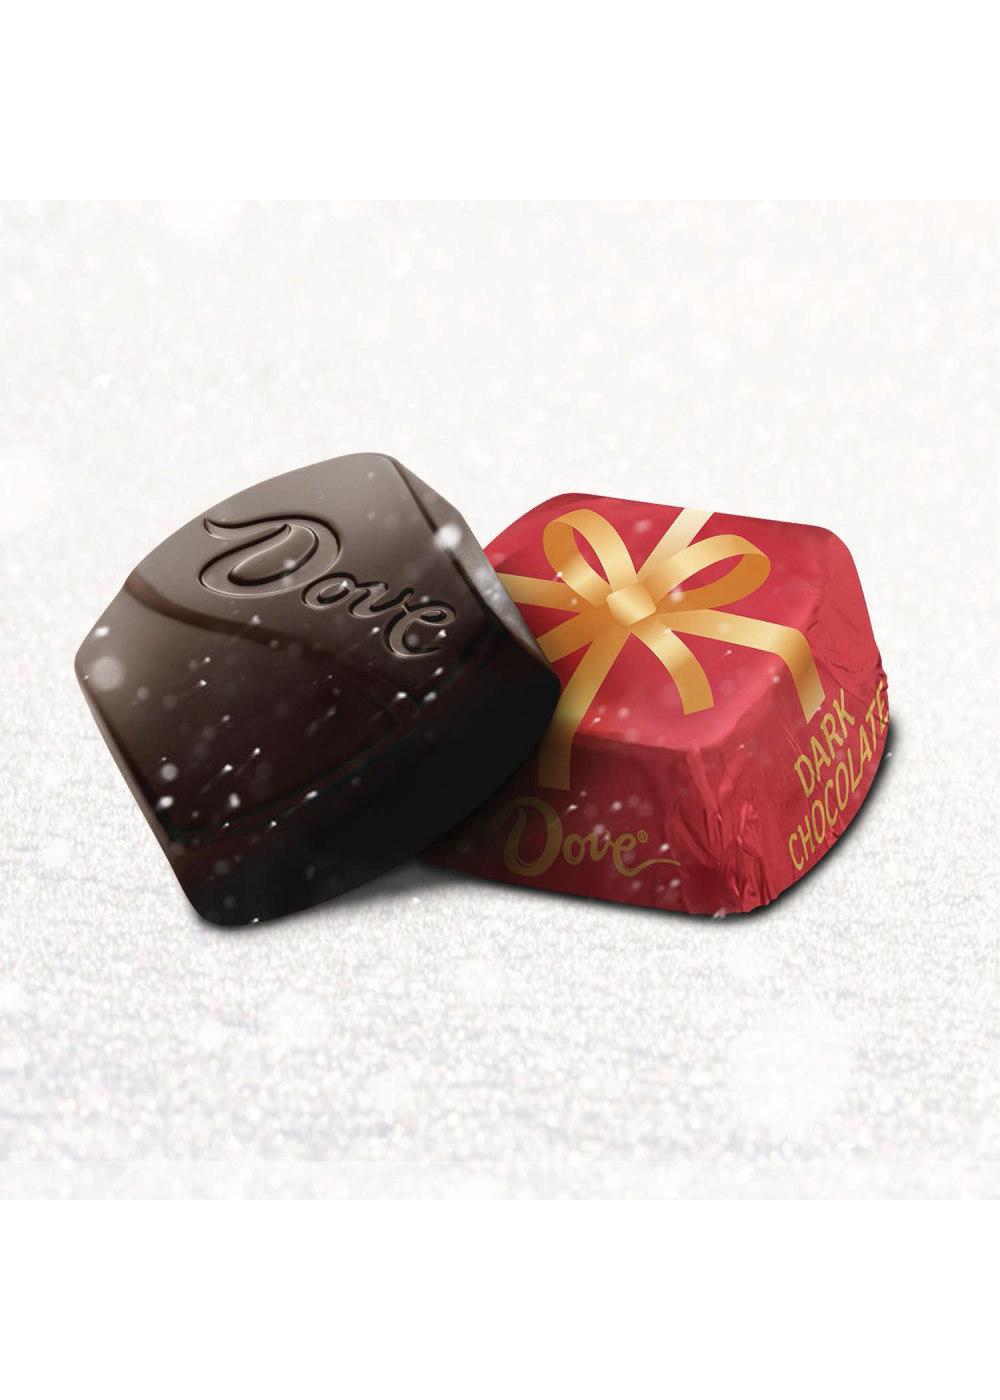 Dove Gifts Dark Chocolate Holiday Candy; image 7 of 8